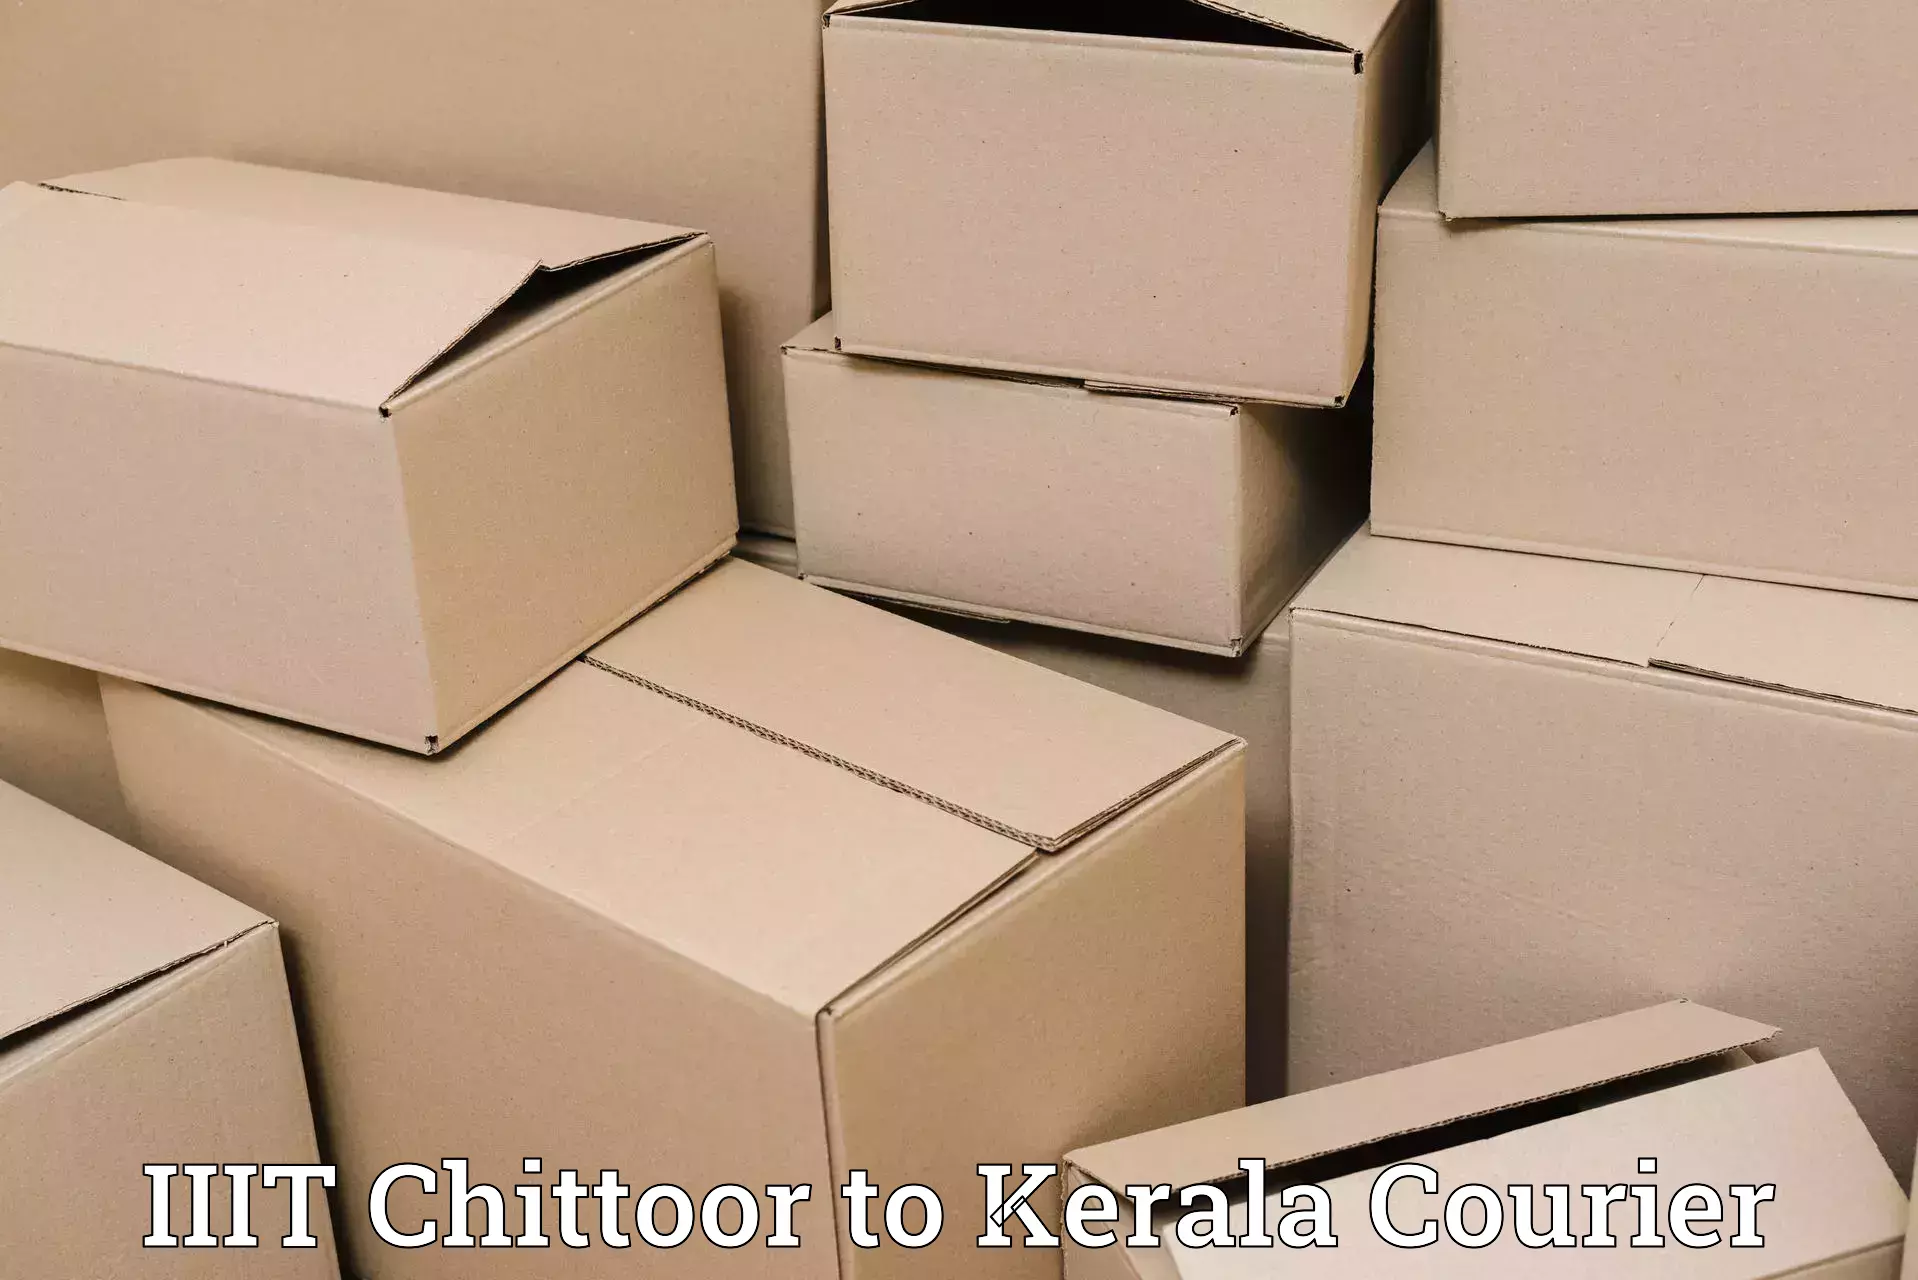 Automated shipping processes IIIT Chittoor to Changanacherry